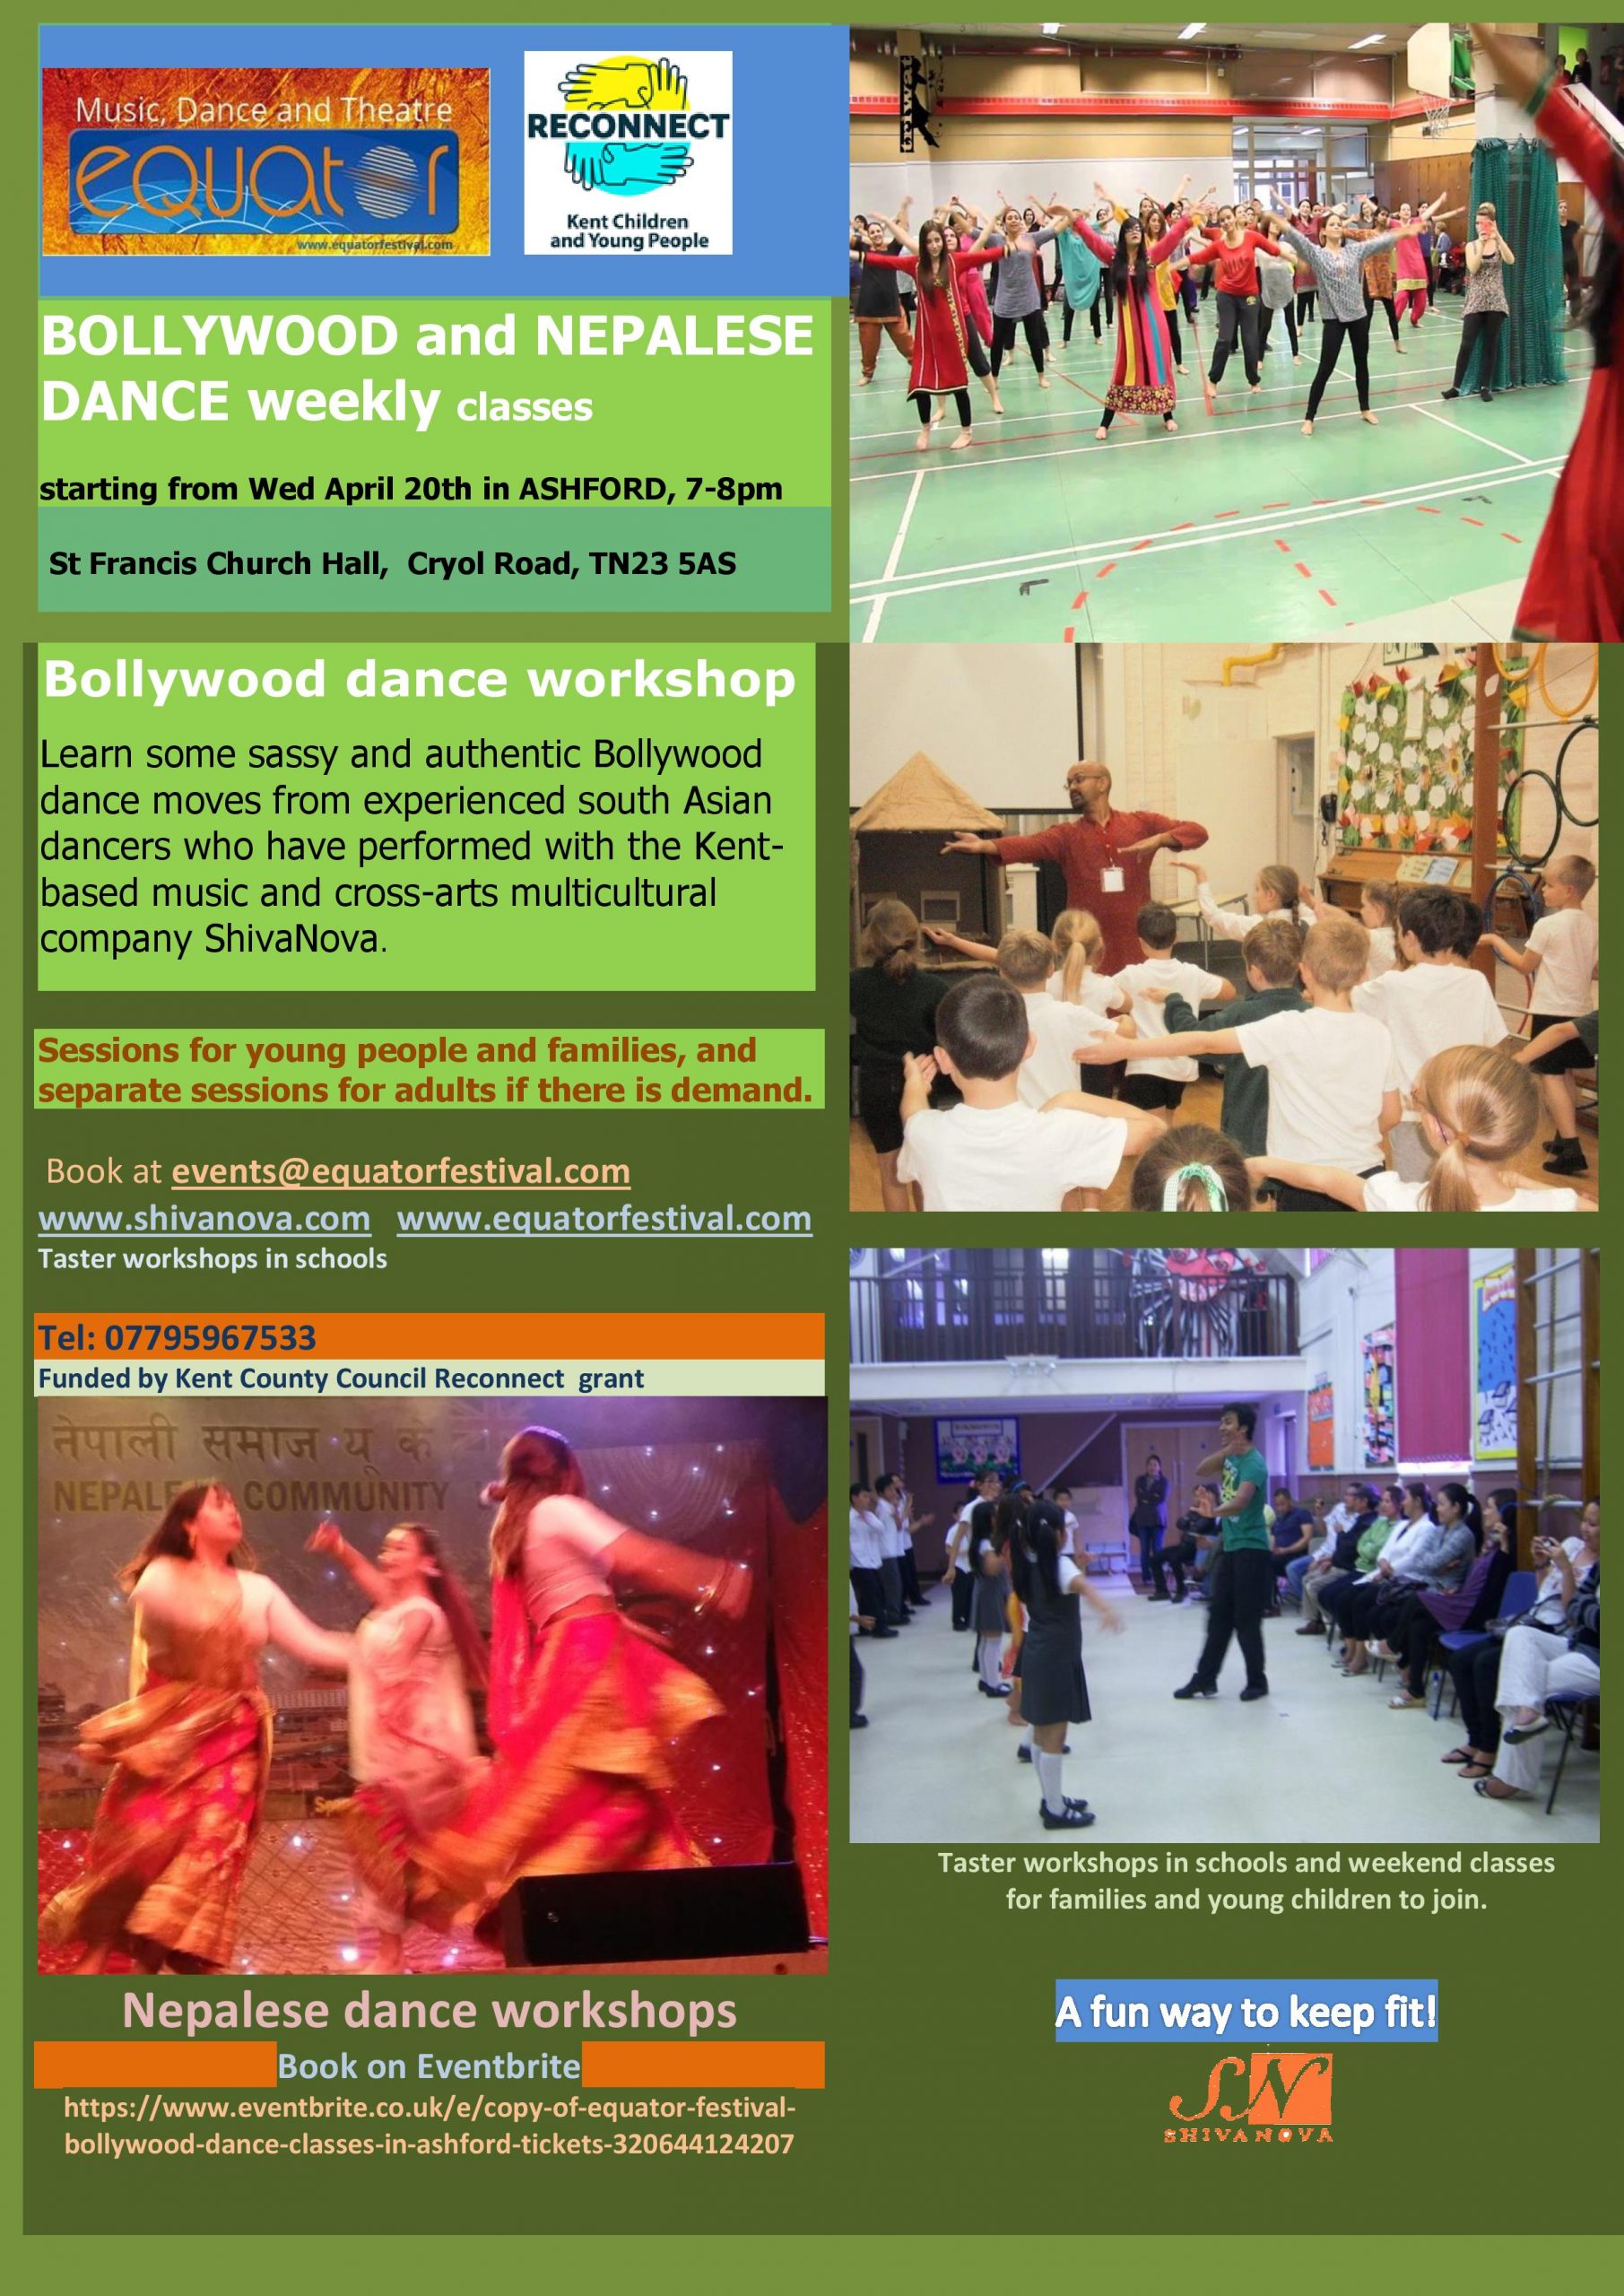 Bollywood and Nepalese Dance weekly classes @ St Francis Church Hall